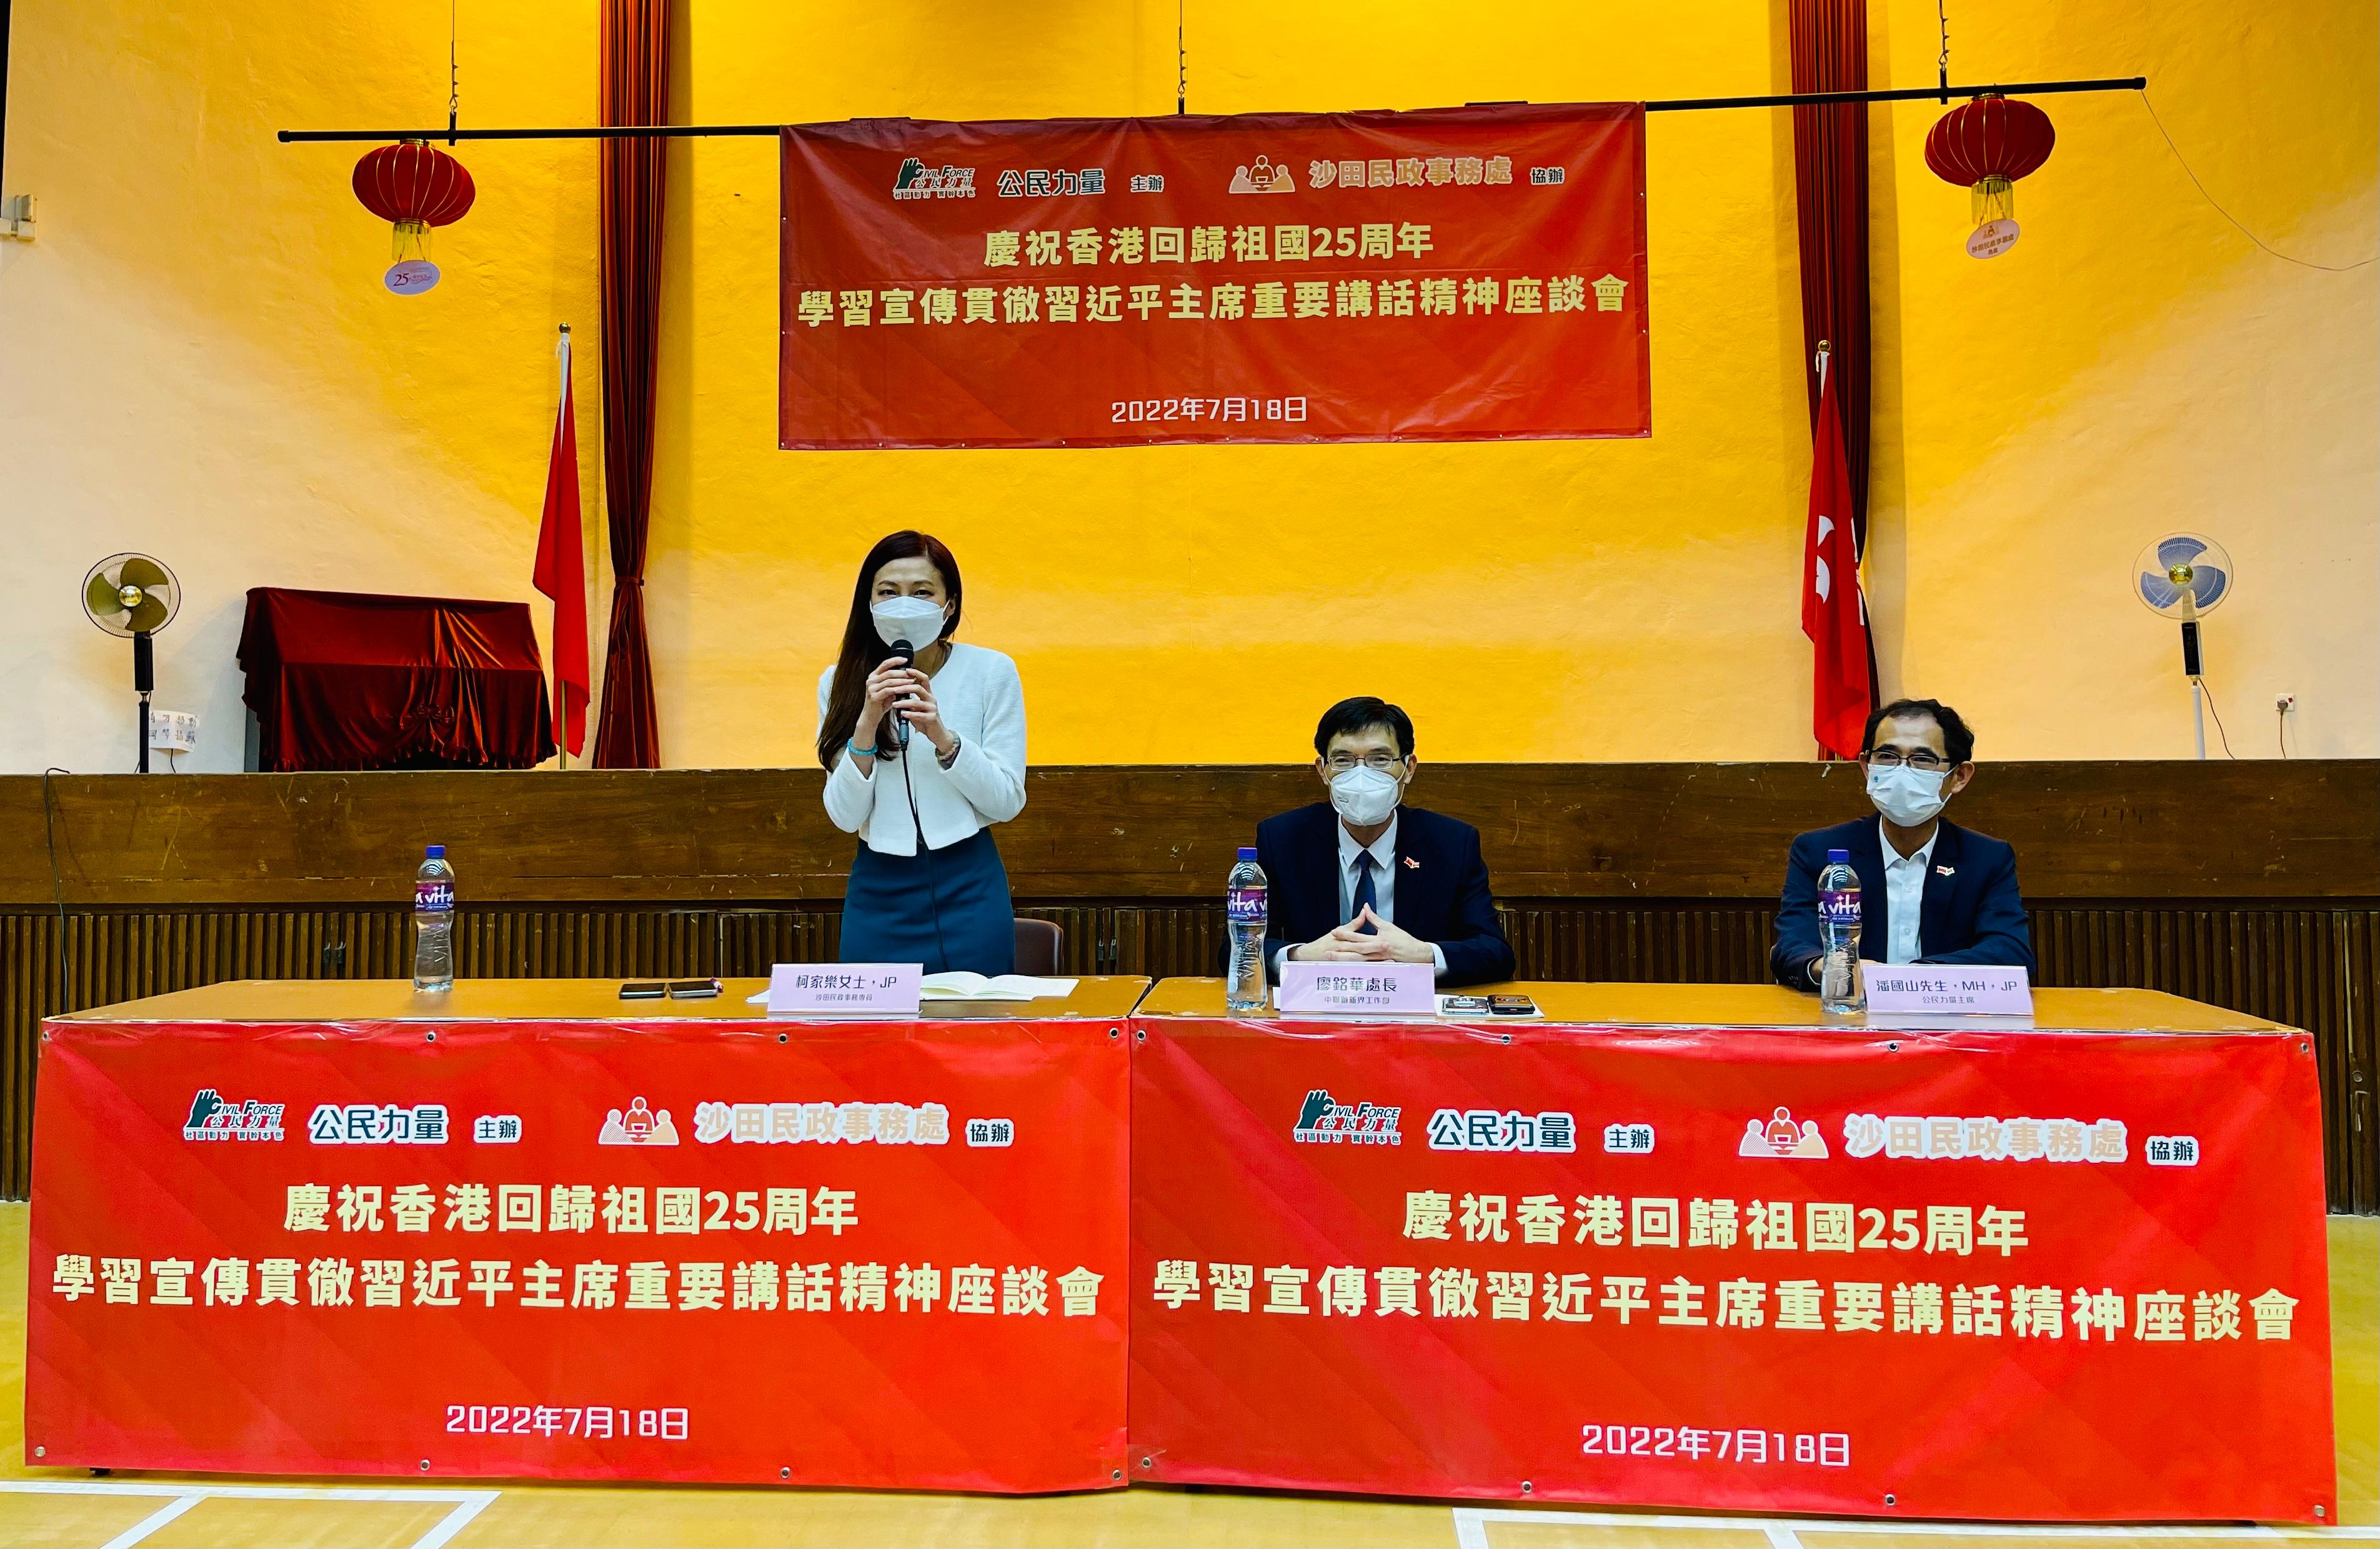 The Sha Tin District Office, in collaboration with the Civil Force, jointly held the "Session to Learn About, Promote and Implement the Spirit of President Xi's Important Speech" at the Lung Hang Estate Community Centre on July 18. Photo shows the District Officer (Sha Tin), Miss Carol Or (left), speaking at the session.